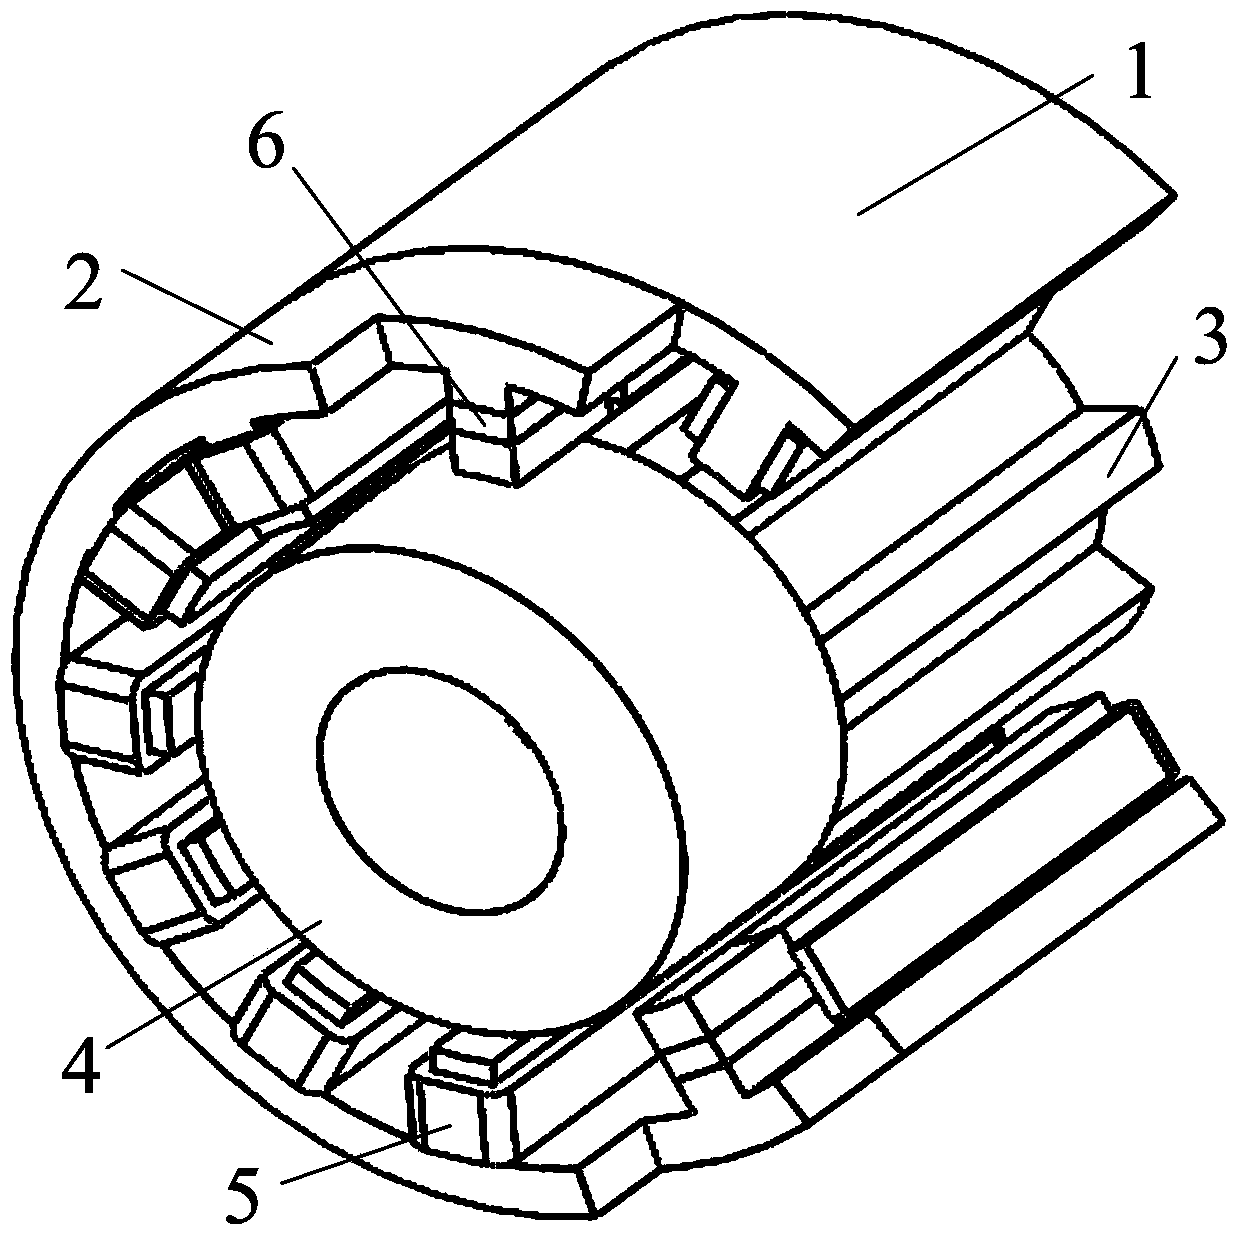 Permanent-magnet biased hybrid magnetic bearing switch reluctance motor